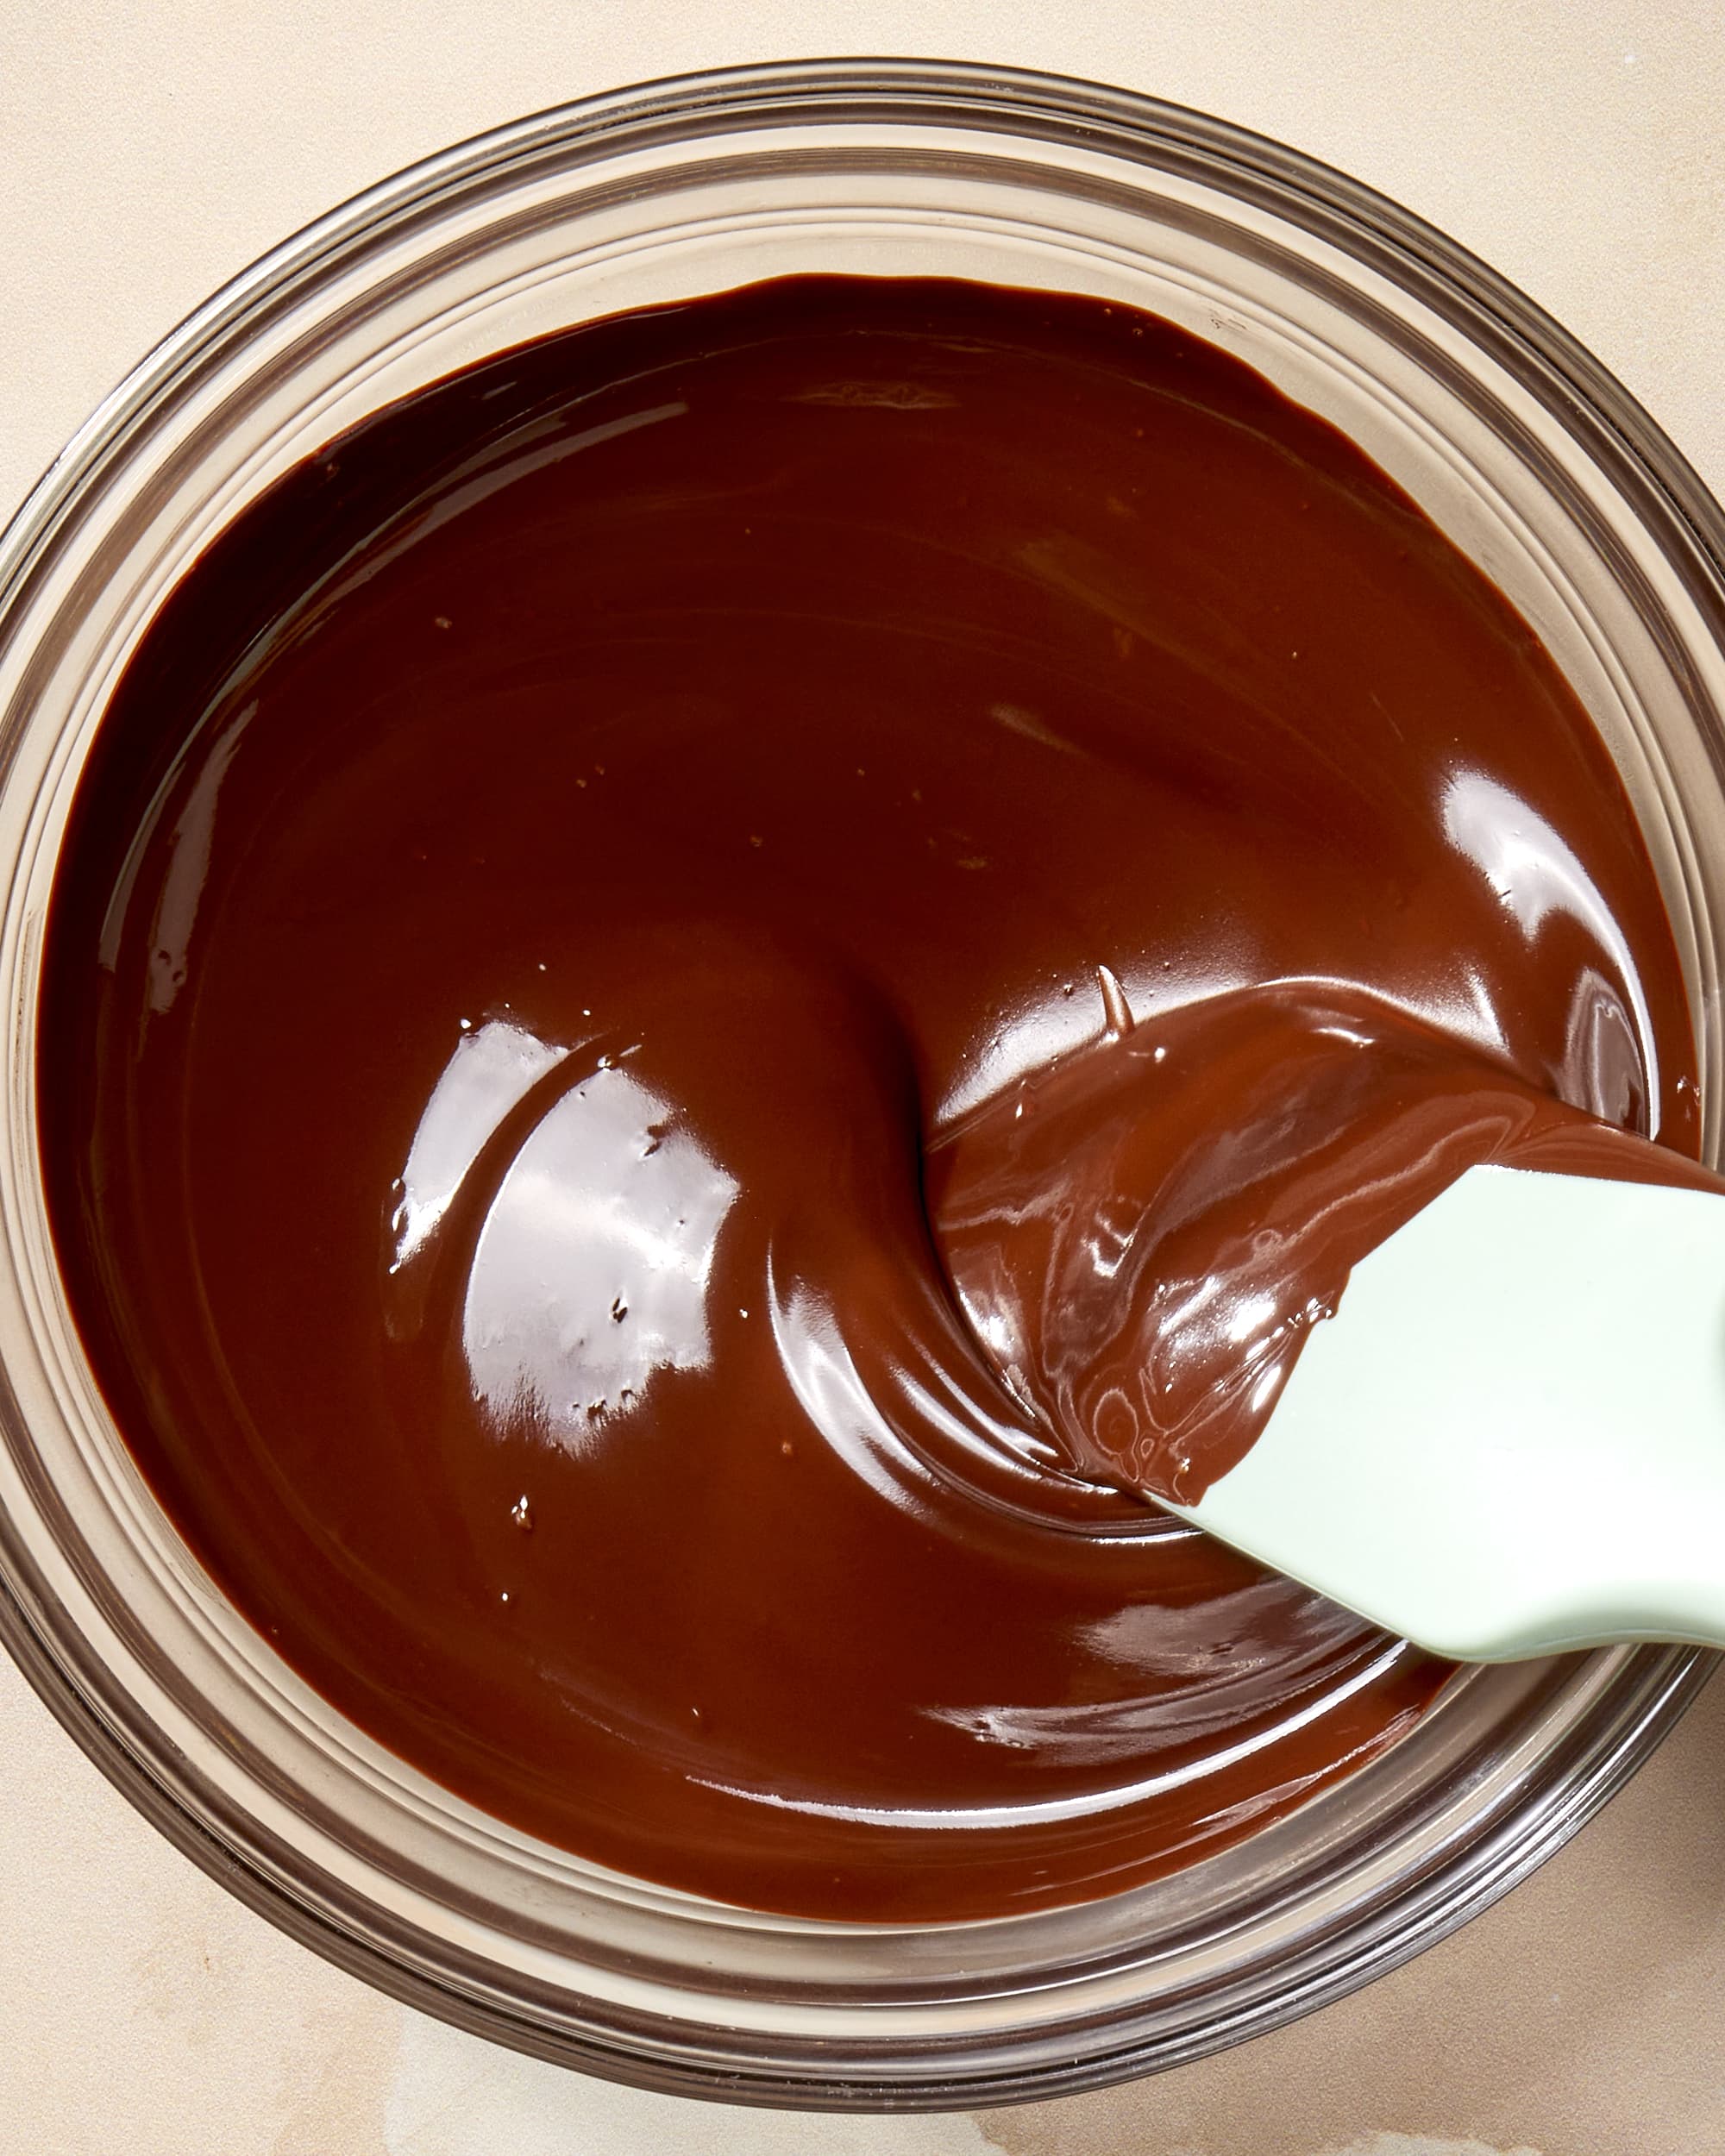 What You Should Know Before Melting Chocolate In The Microwave